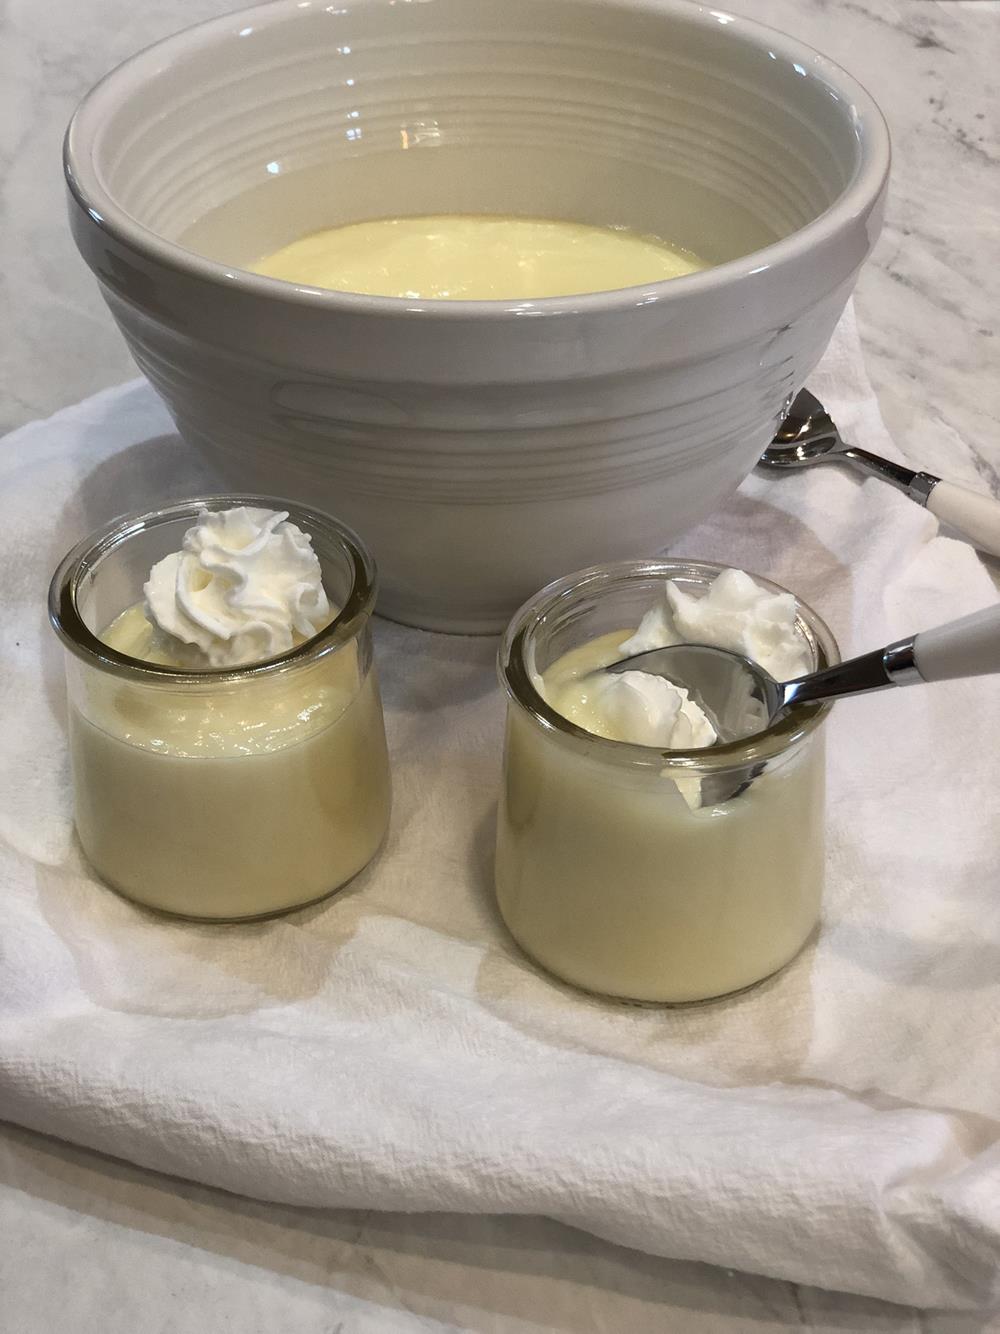 lemon pudding in white bowl with glass bowls and spoon